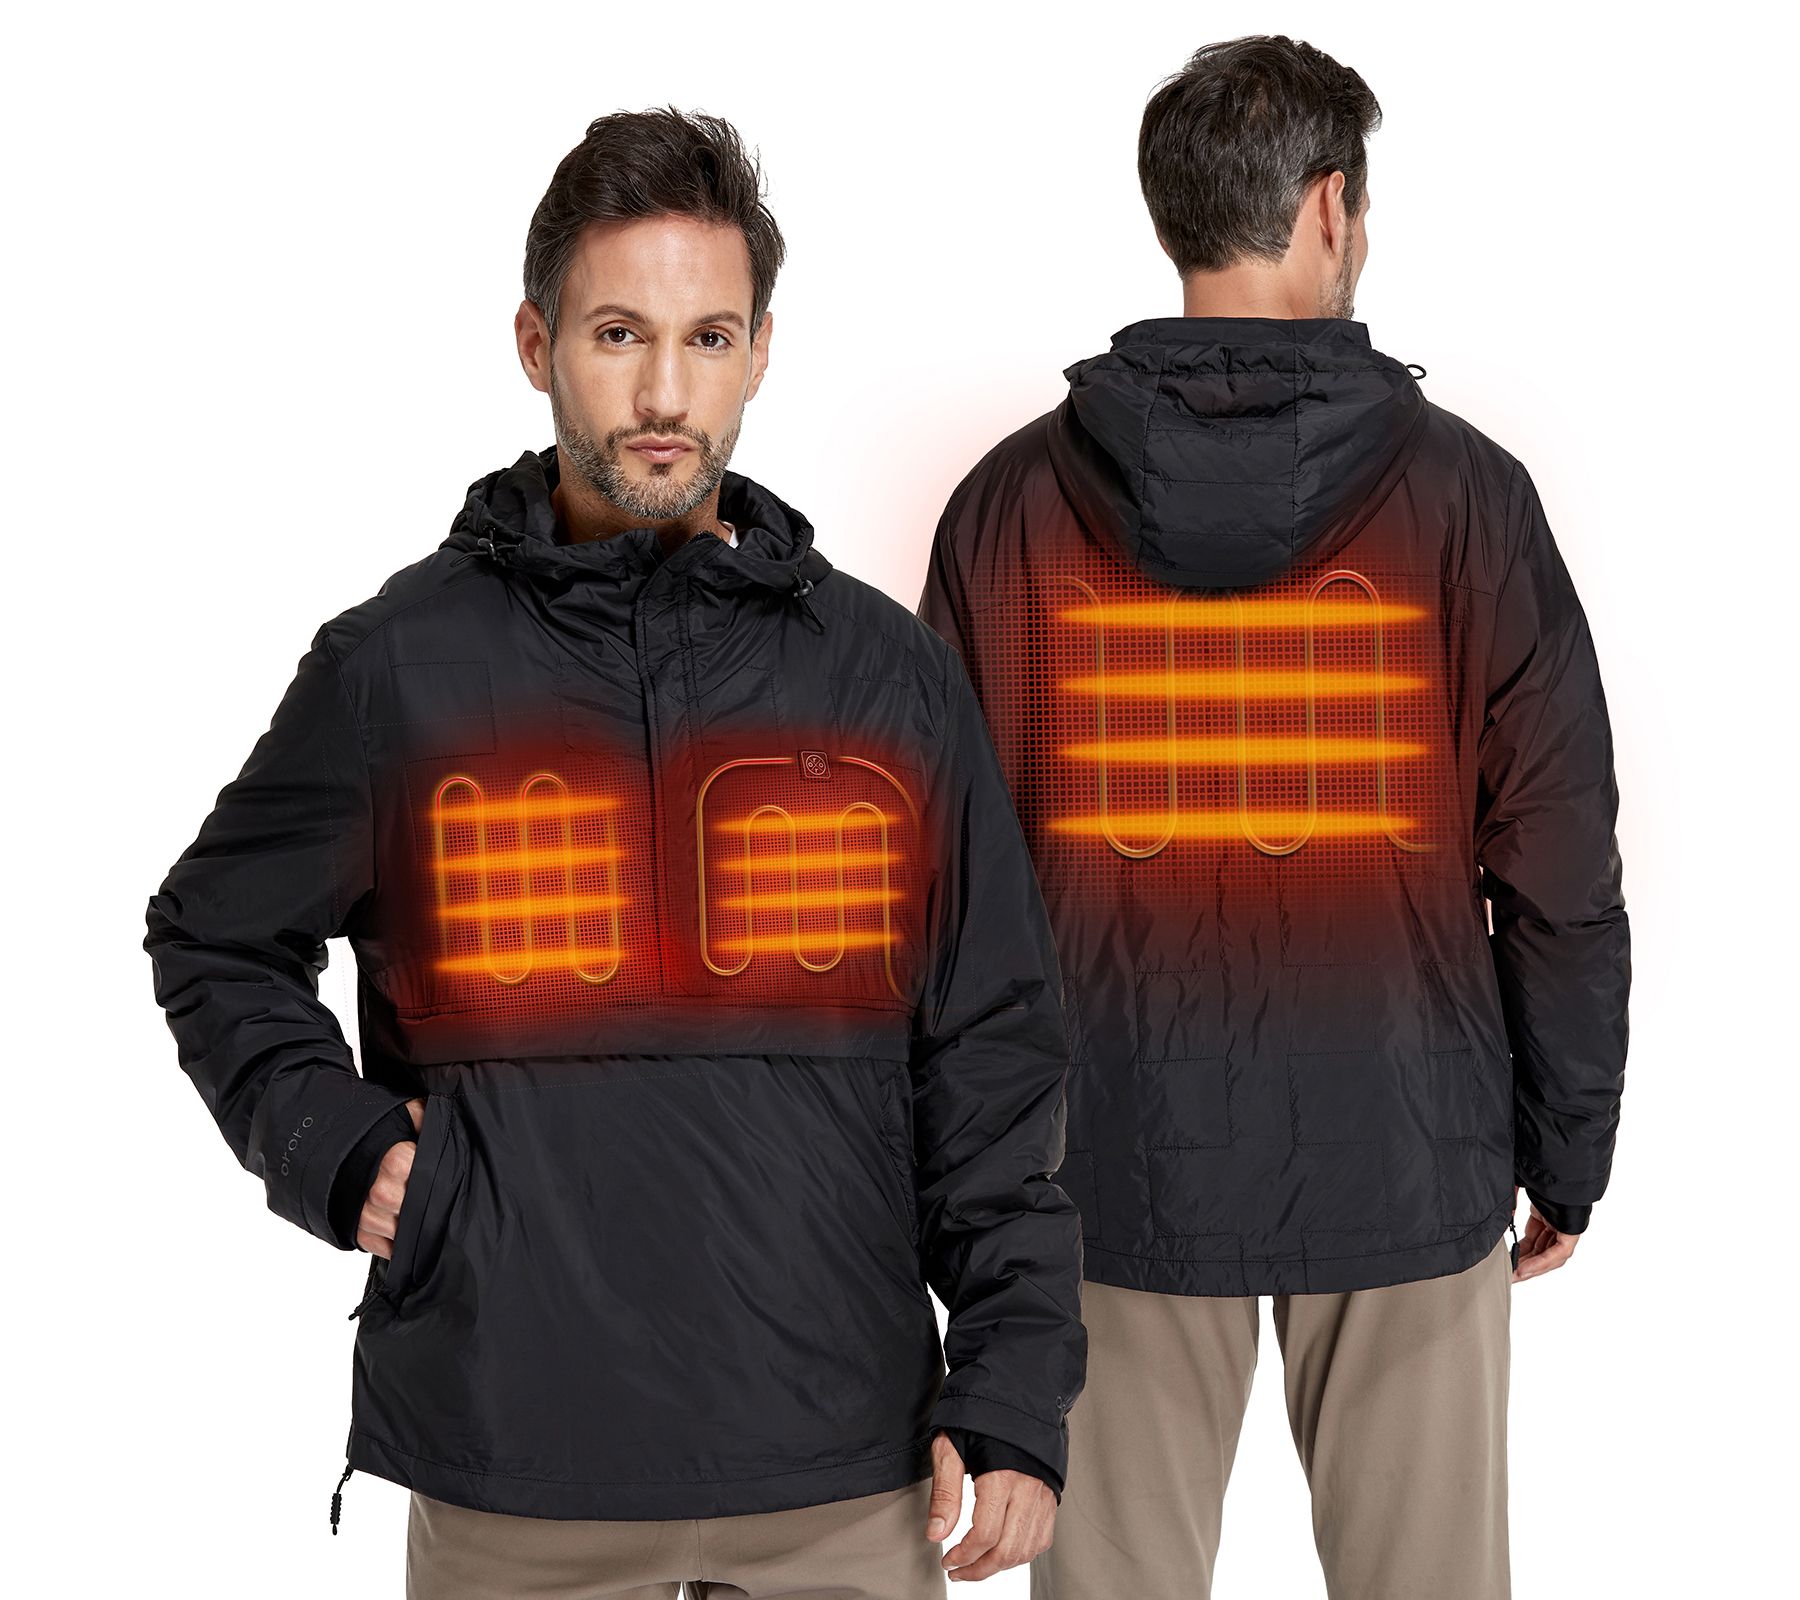 ORORO Men's Heated Pullover Jacket with BatteryPack - QVC.com